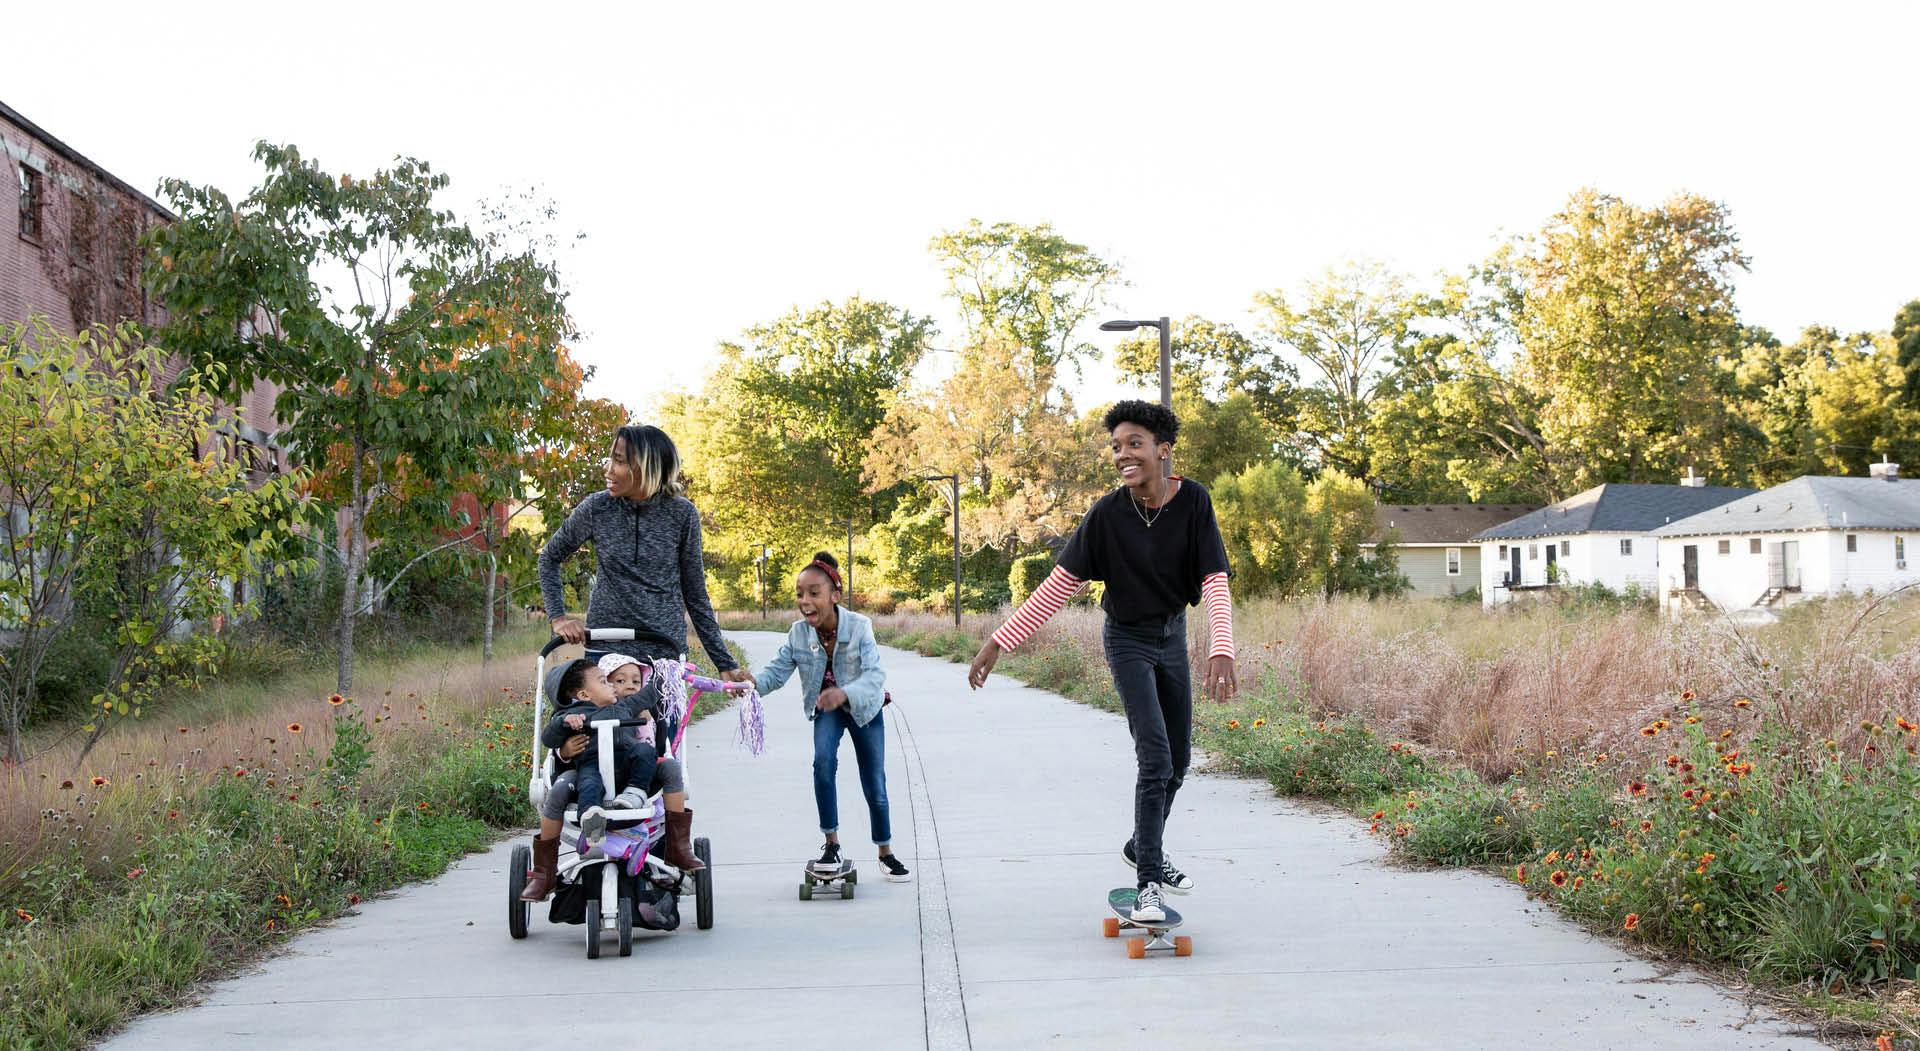 A family with stroller and skateboards rolls down the Southwest Trail.